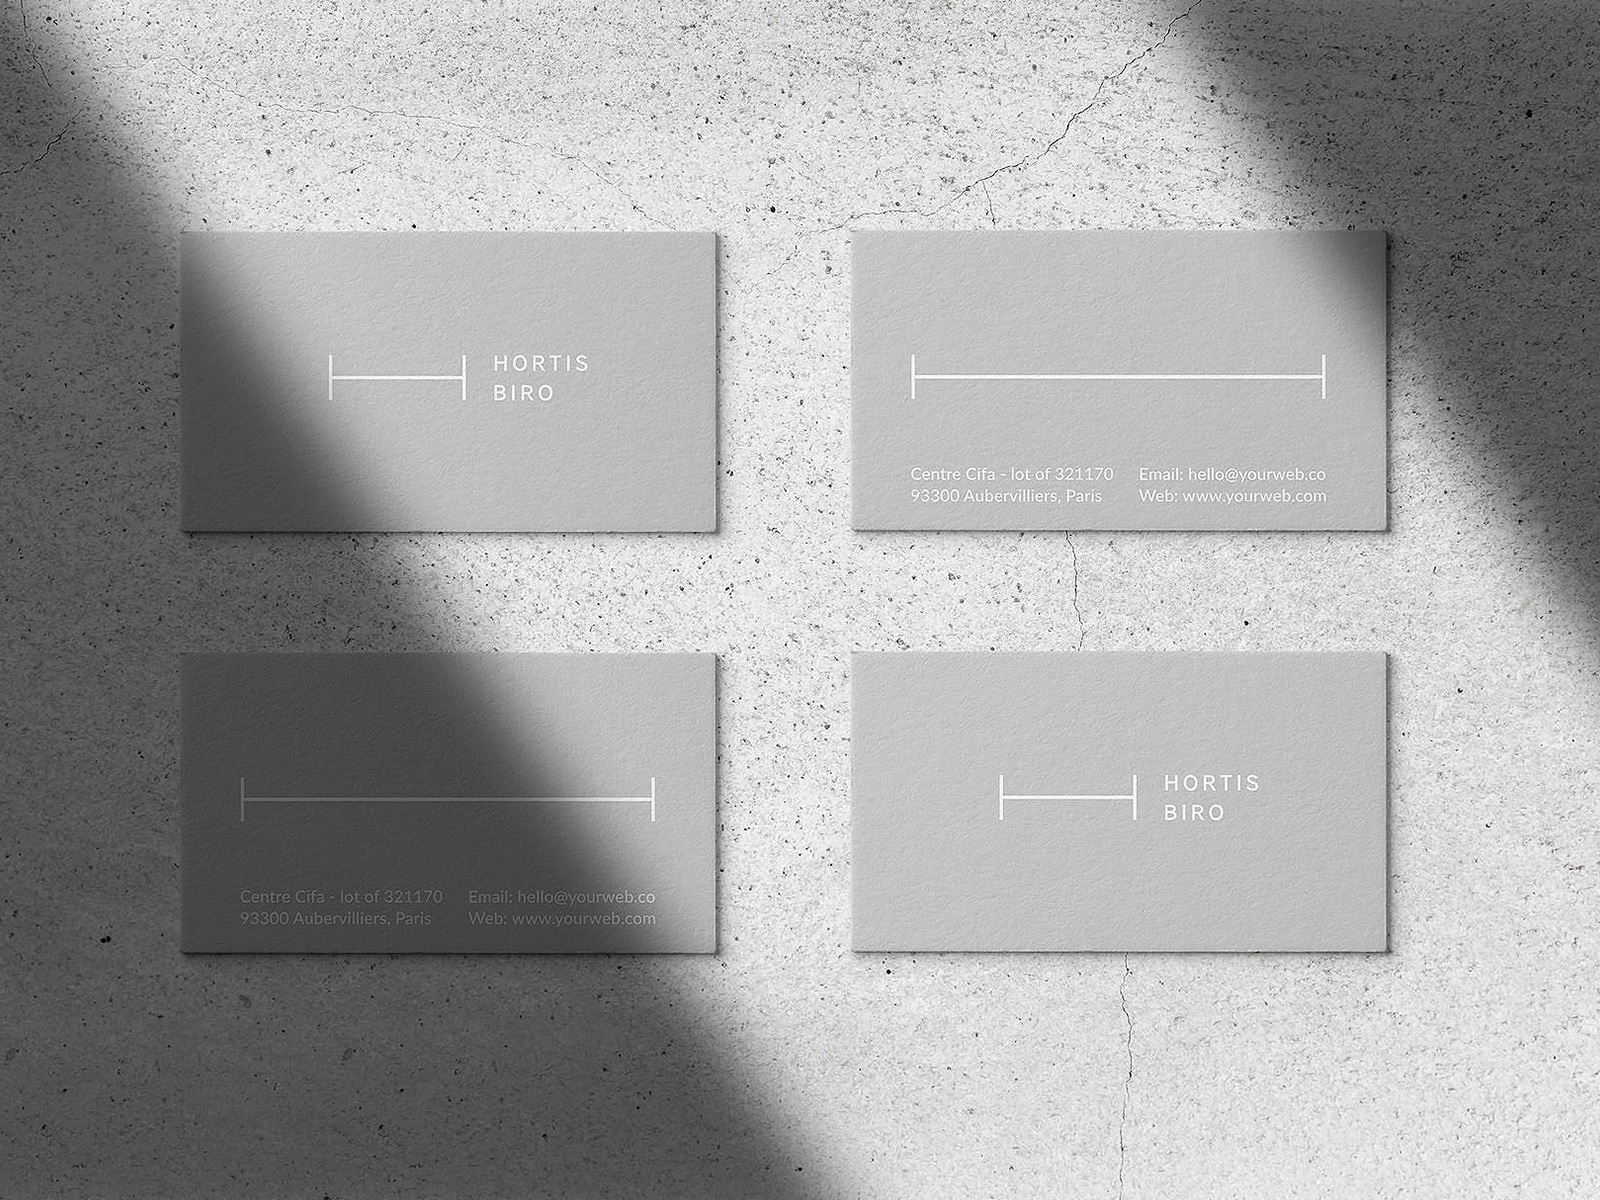 Download Plumere Shadow Stationery Mockups By Pixelbuddha On Dribbble PSD Mockup Templates